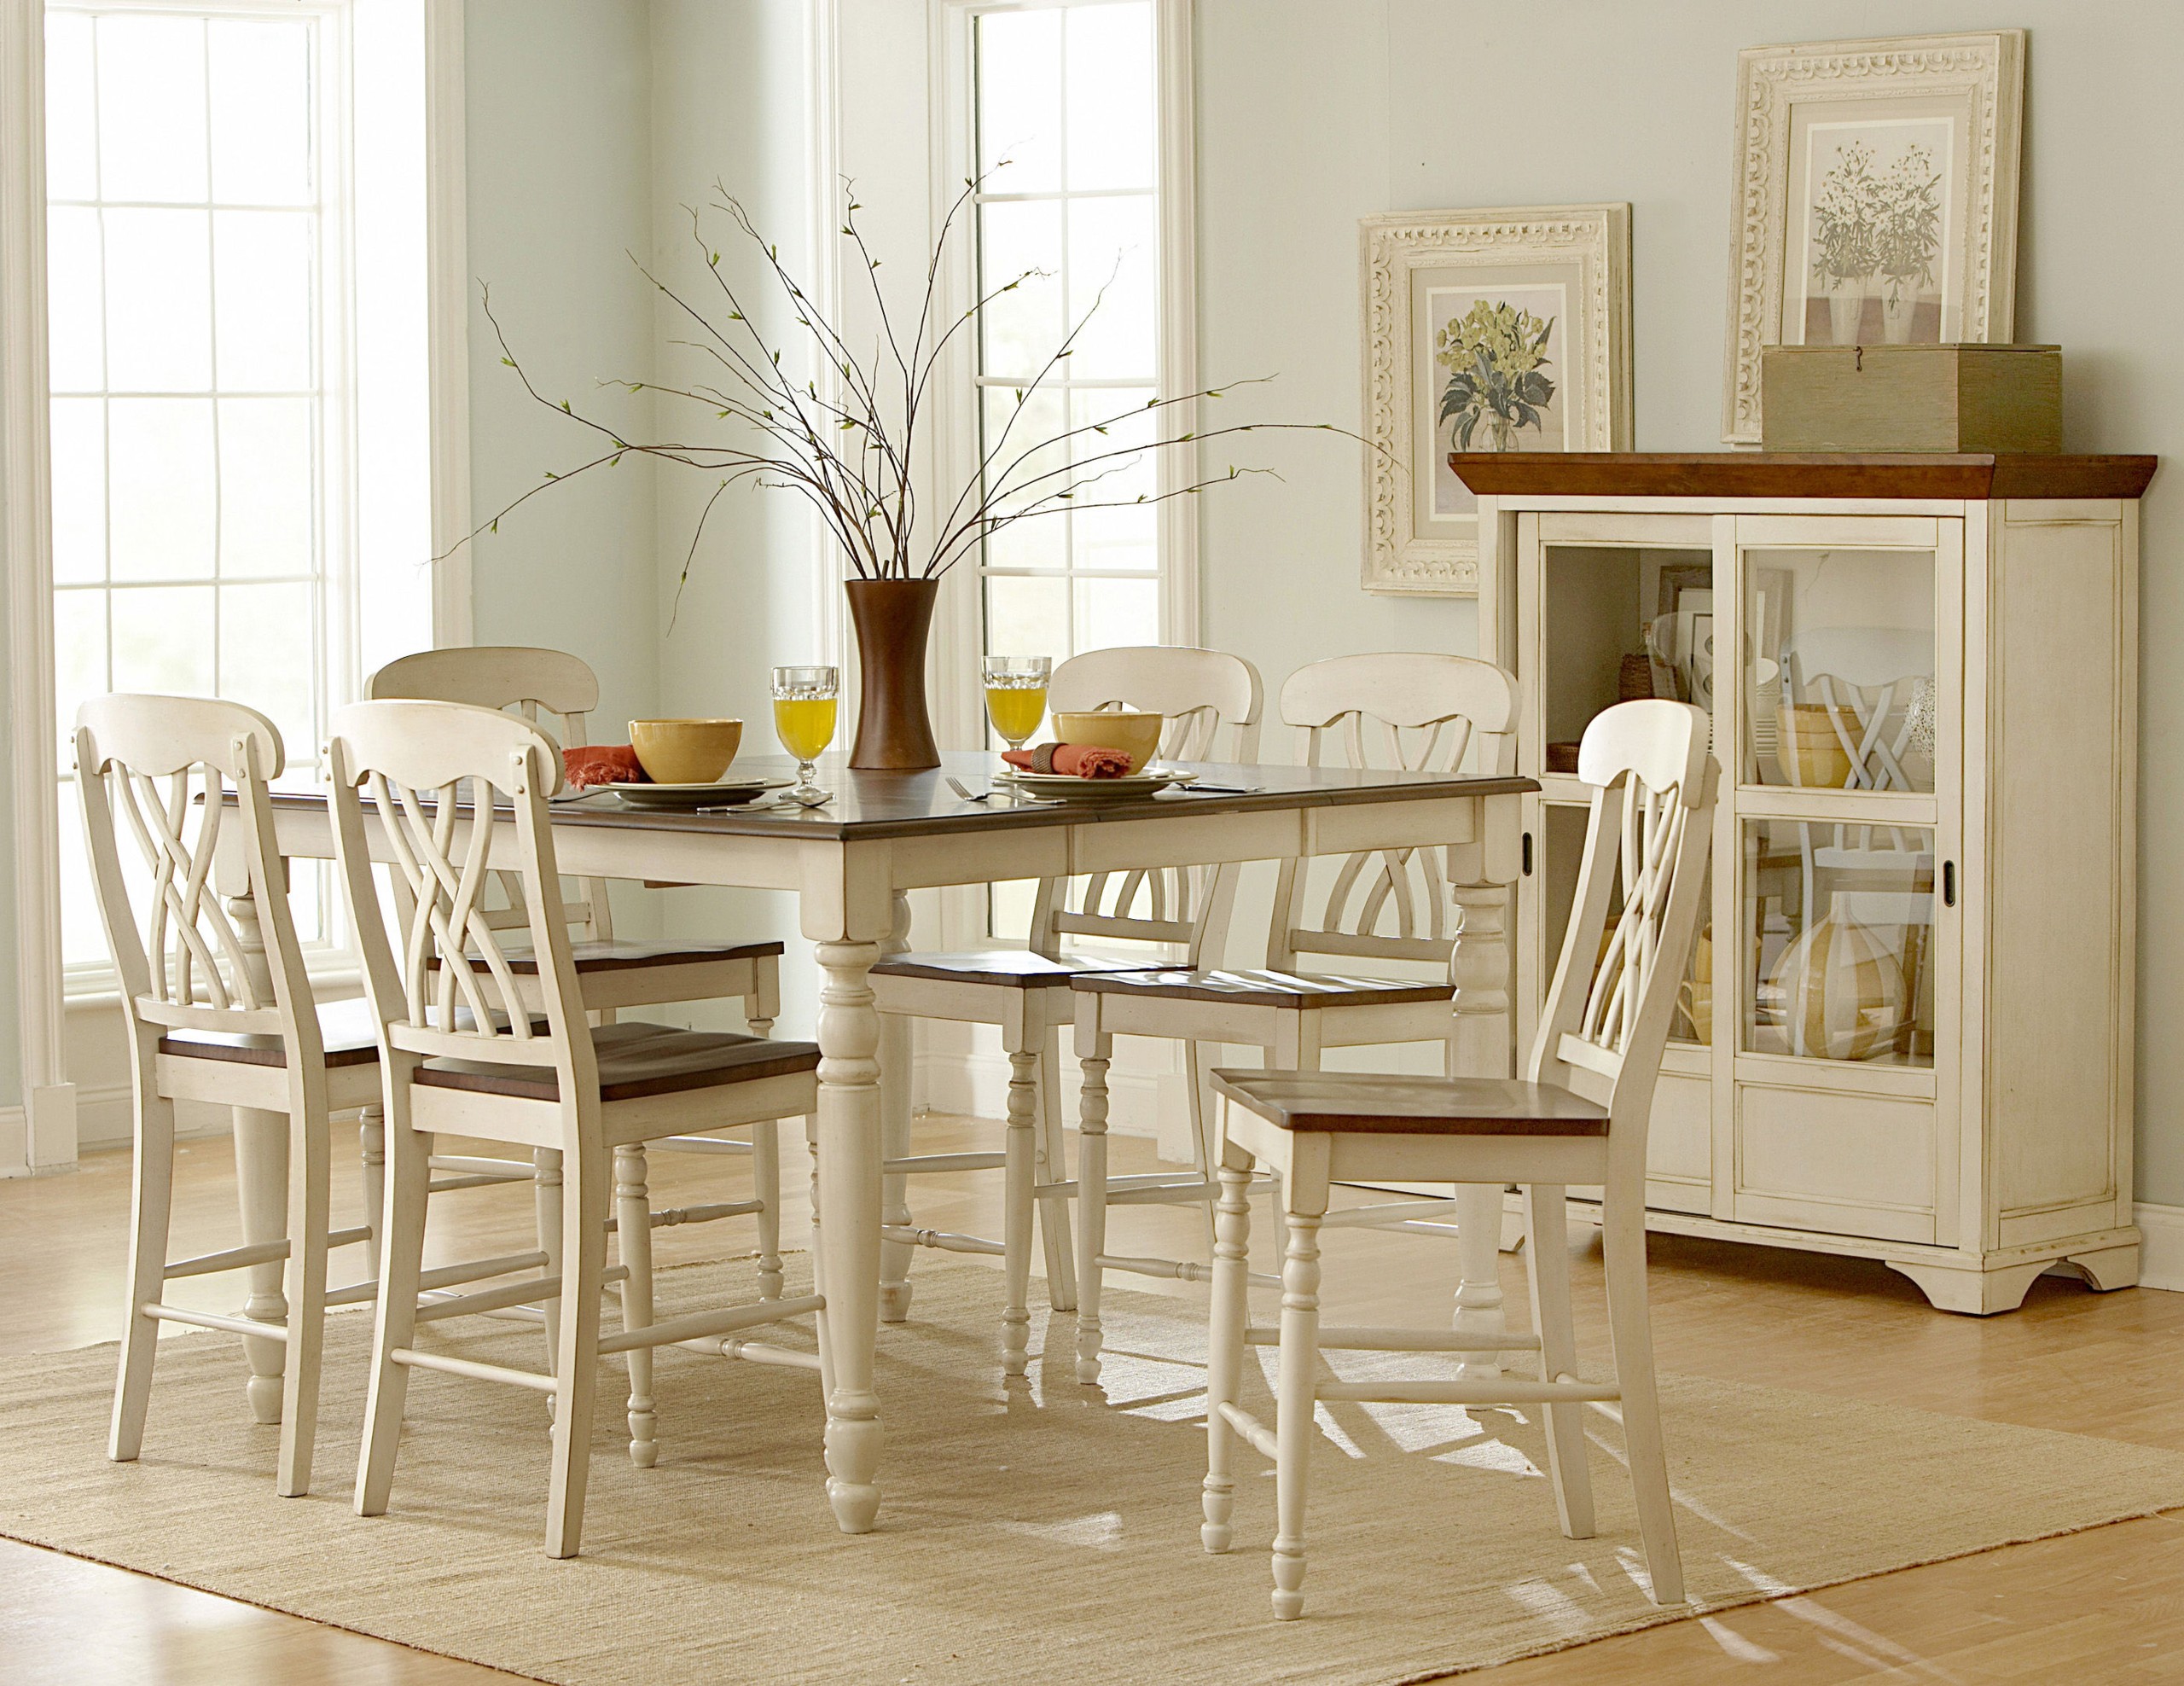 Light Wood Counter Height Dining Room Sets